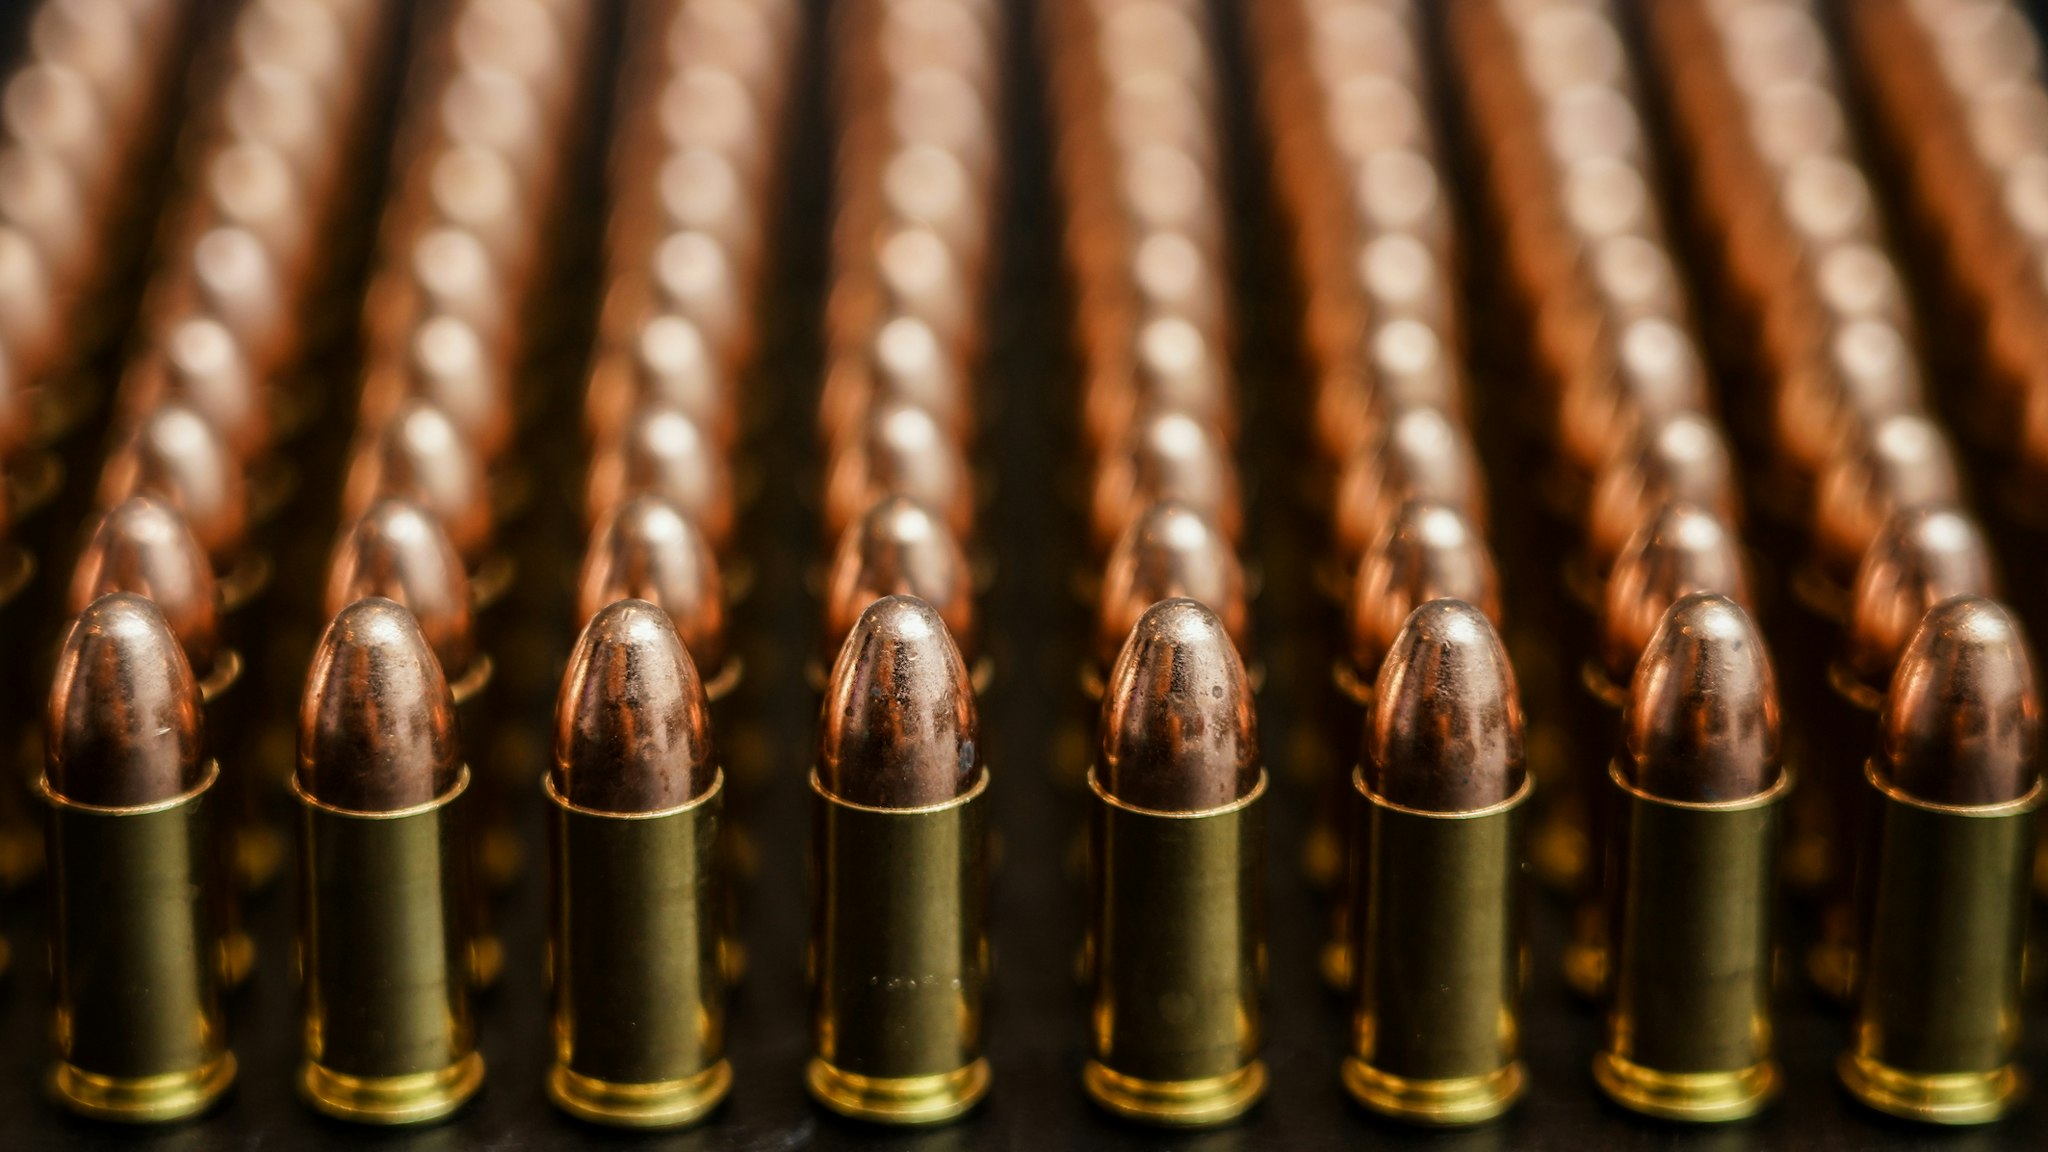 Many bullets or ammunition standing in straight line with blurred background. 9mm